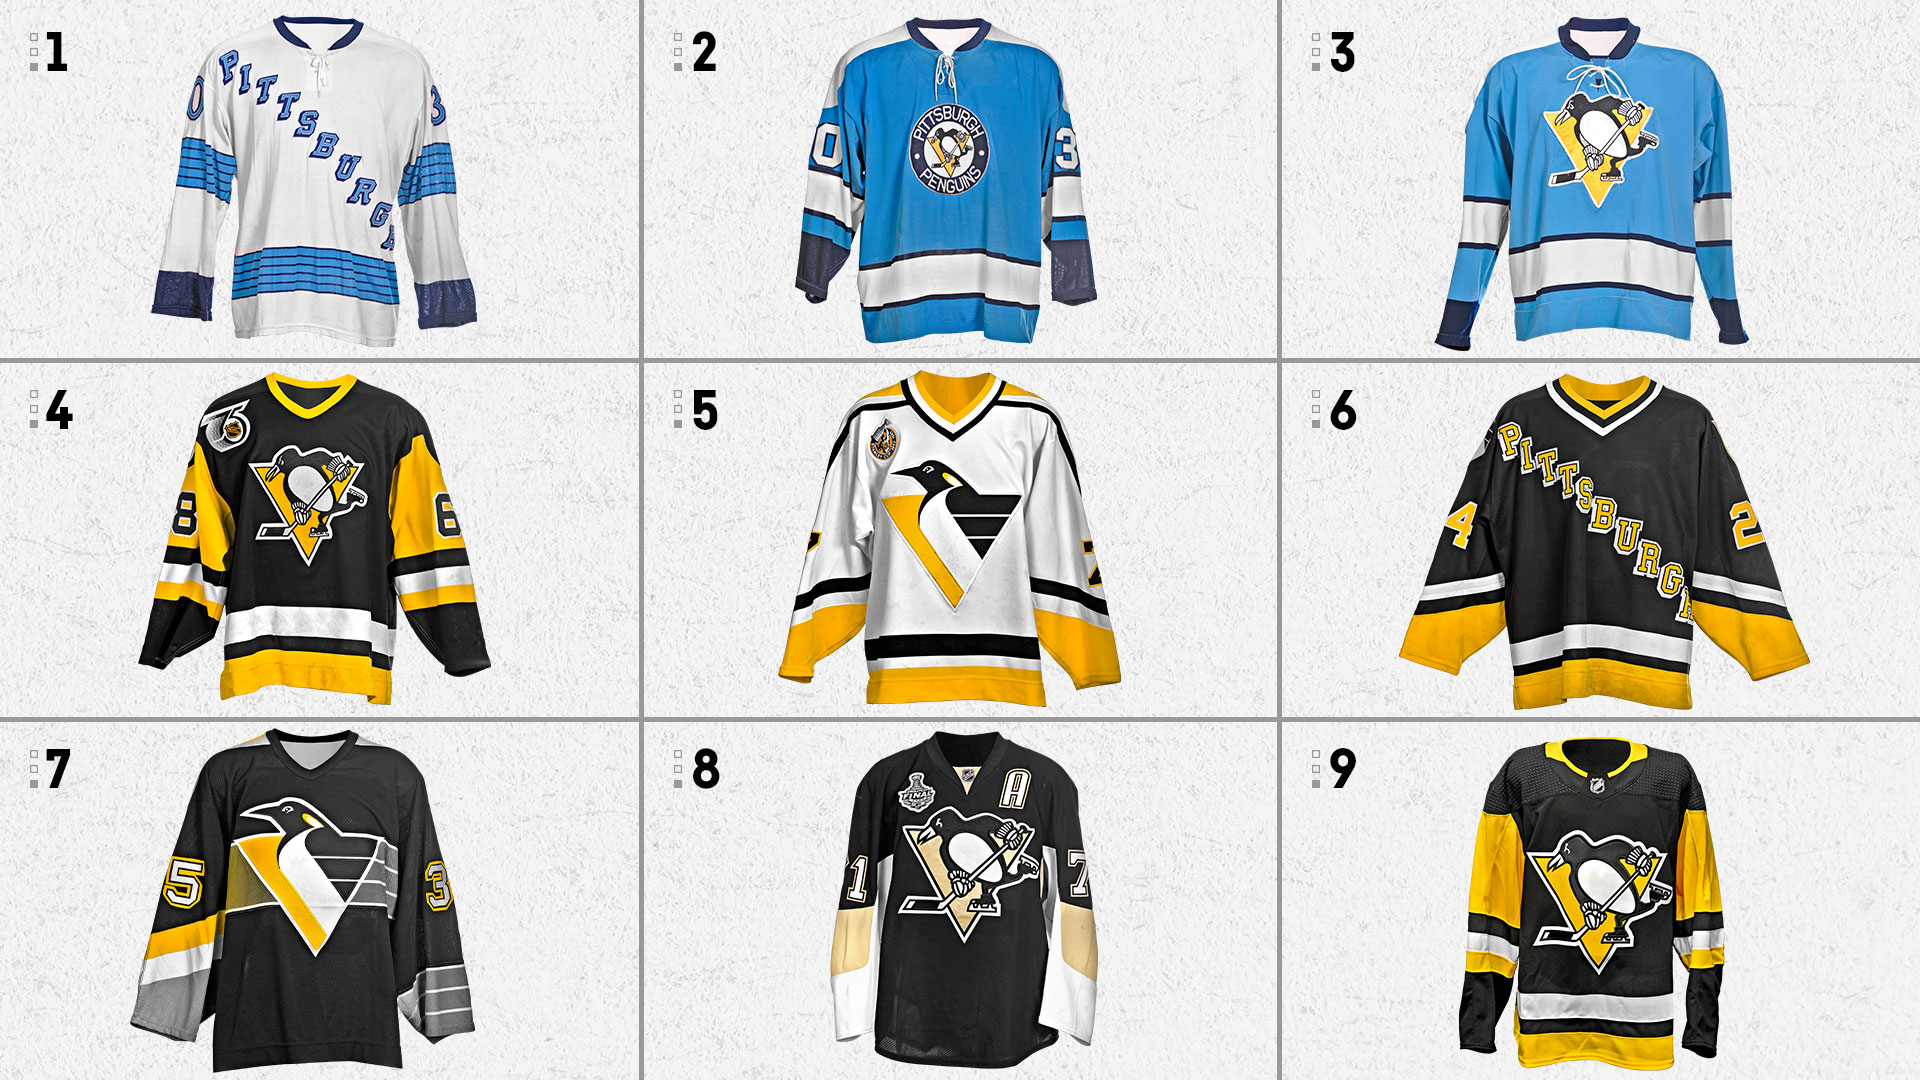 One jersey to rule them all - Pittsburgh Penguins